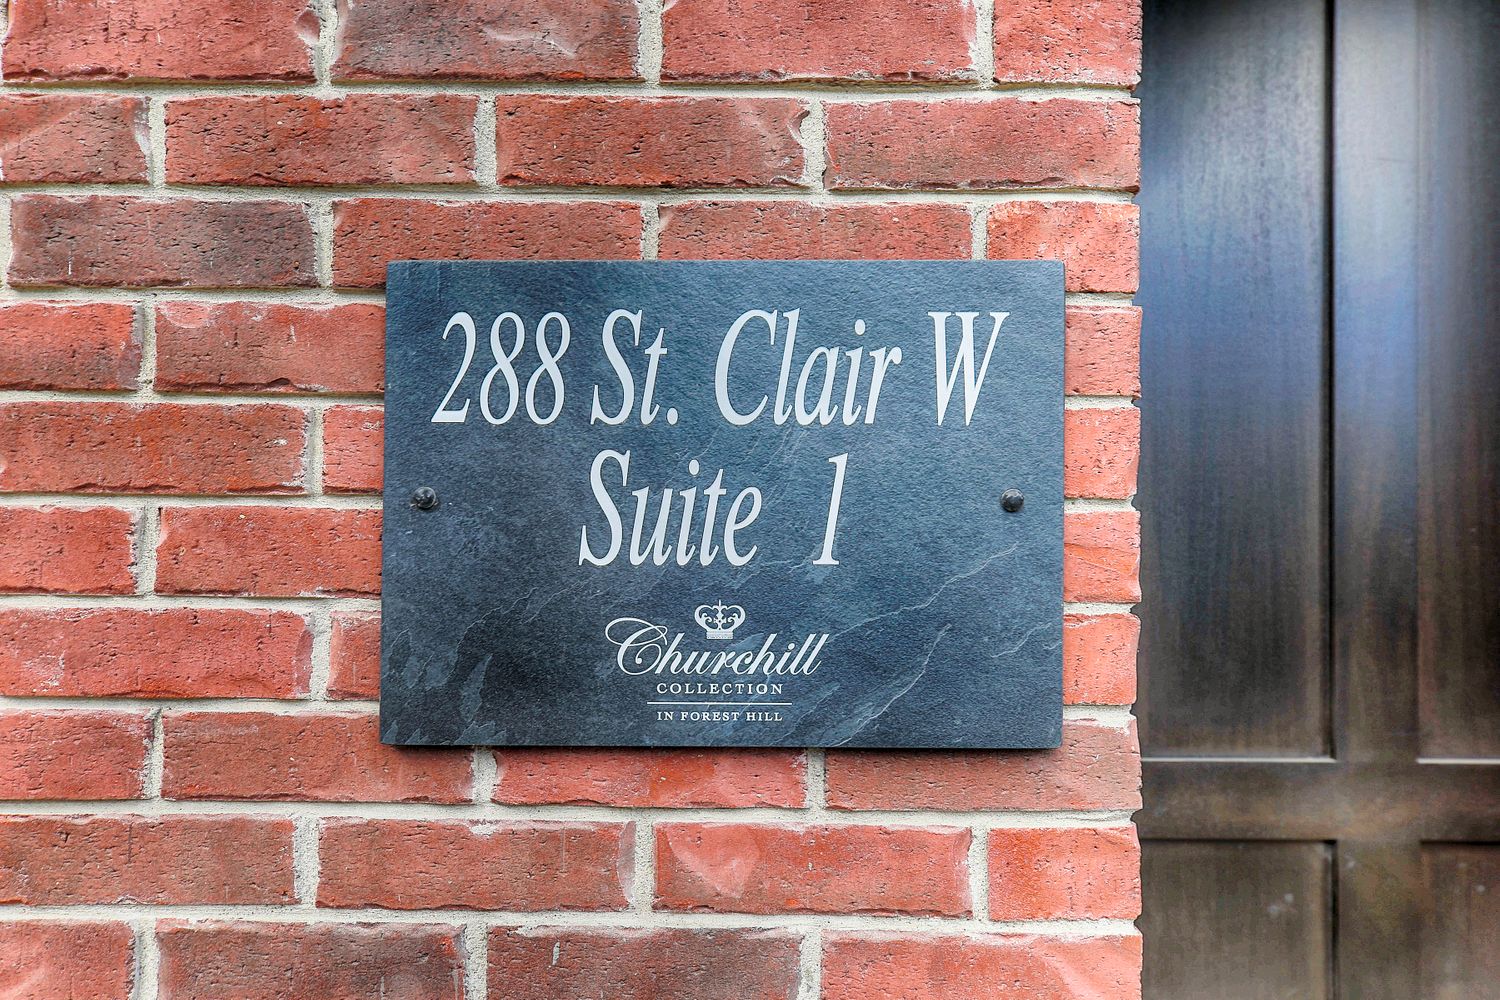 288-292 St Clair Avenue W. Churchill Collection Townhomes is located in  Midtown, Toronto - image #4 of 4